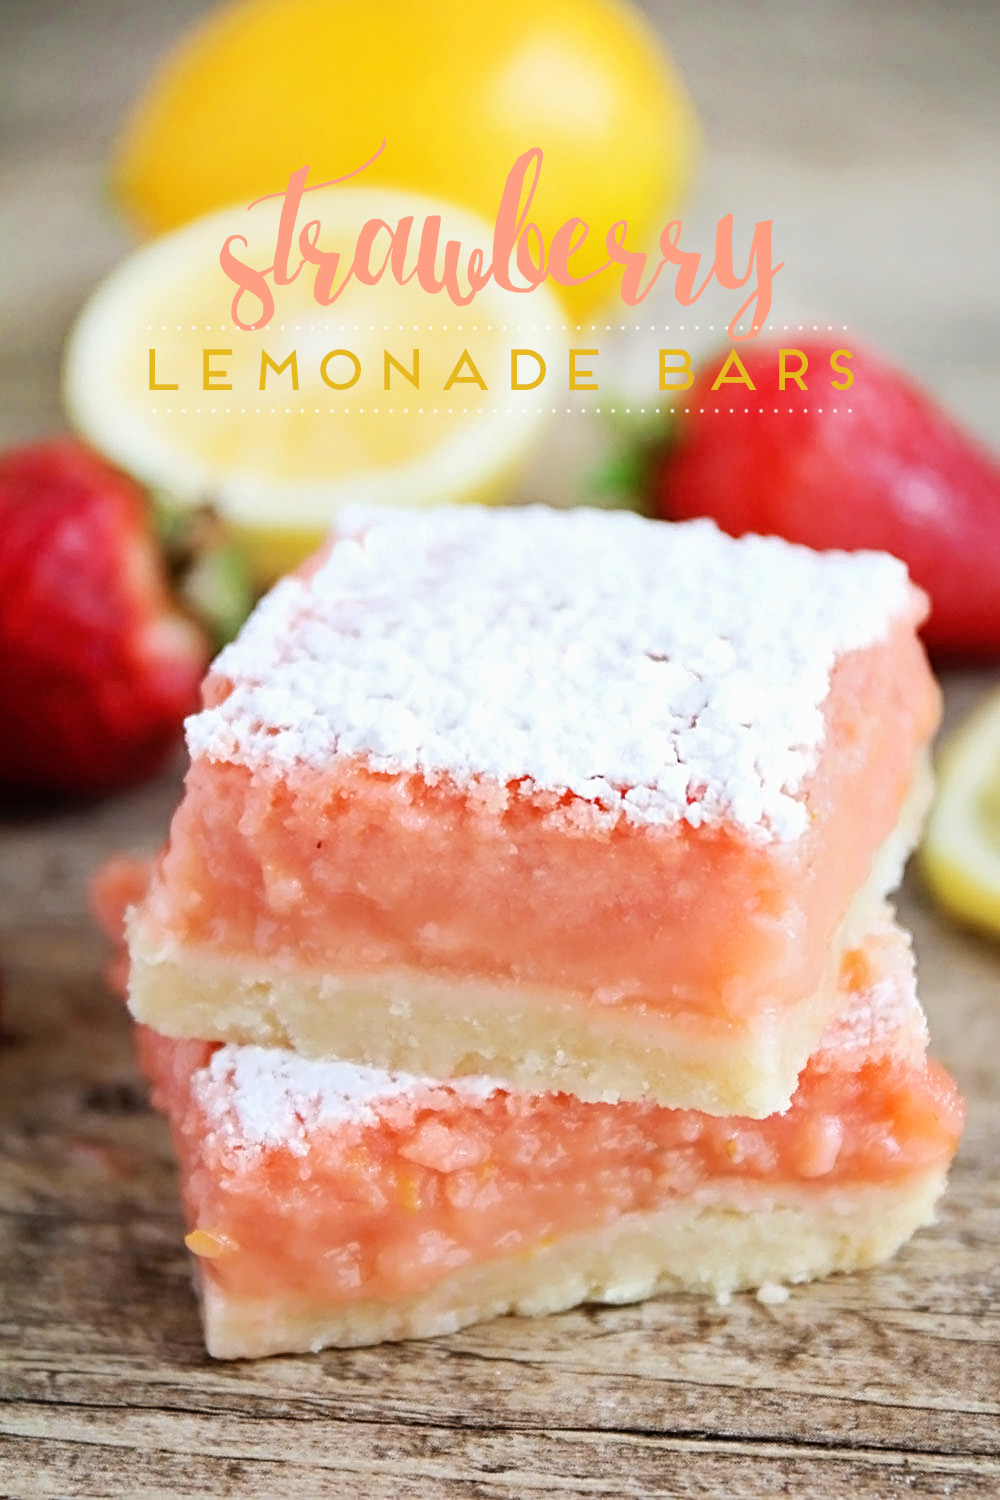 These strawberry lemonade bars are tangy and sweet and perfect for summer. They taste just like a glass of strawberry lemonade!